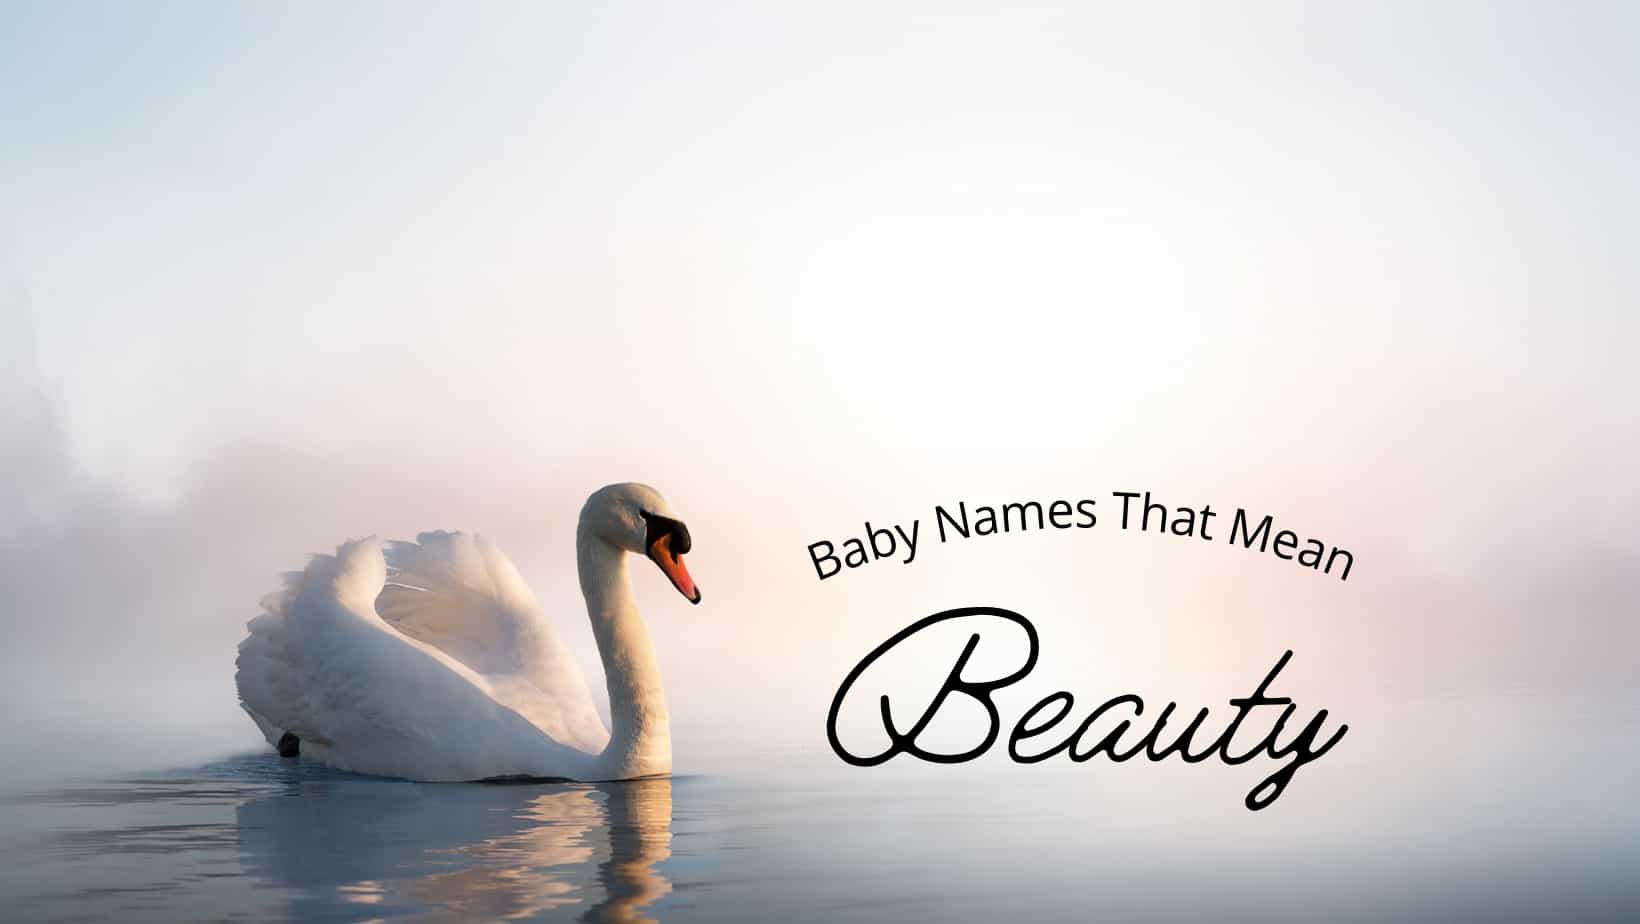 Baby Names That Mean Beauty